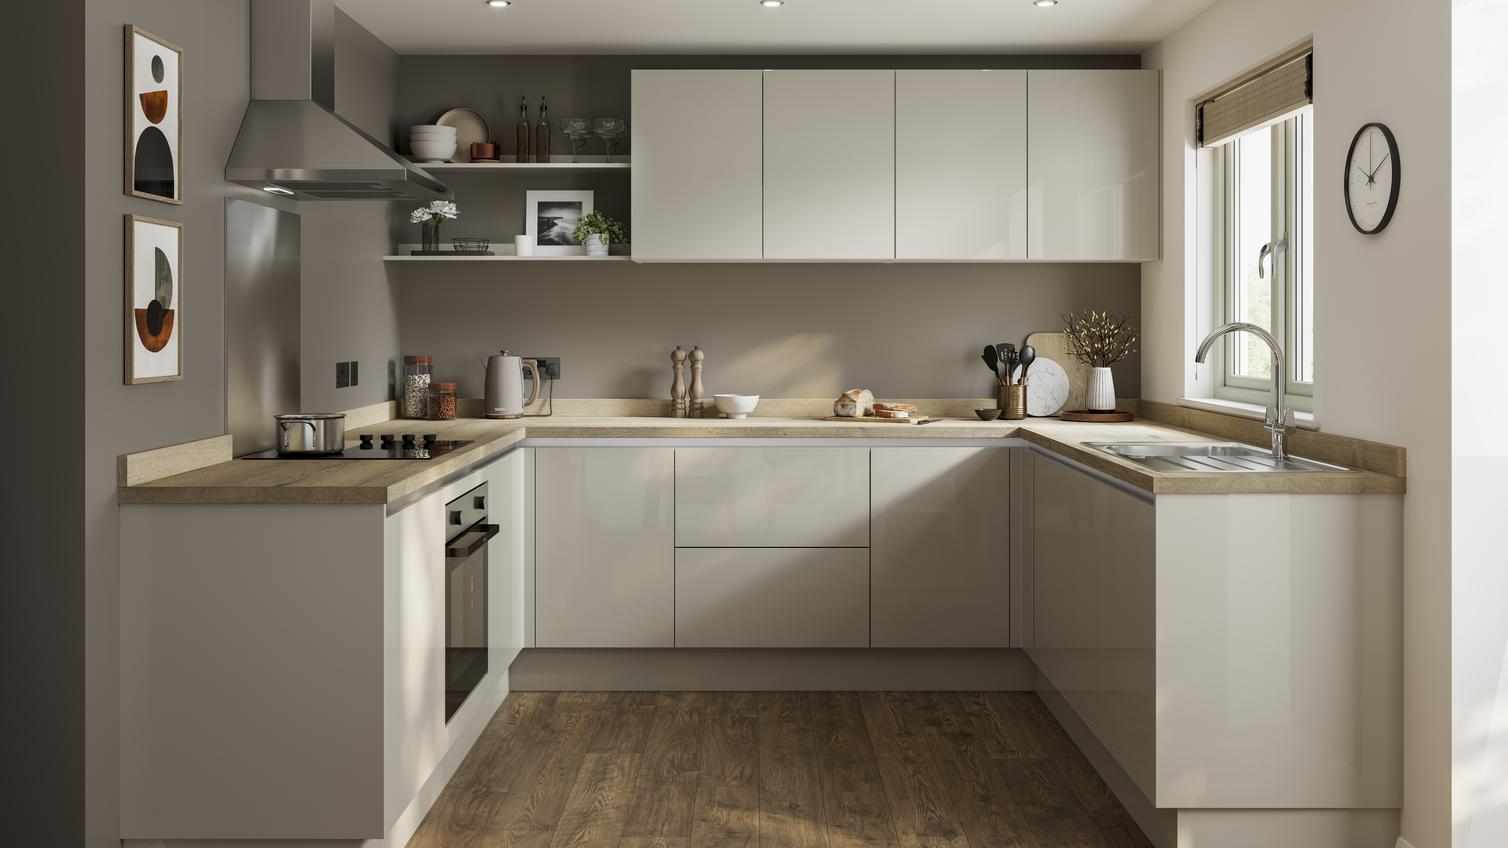 A minimal sandstone kitchen design with integrated handle doors, a warm wood worktop and floors, and chrome cooking devices